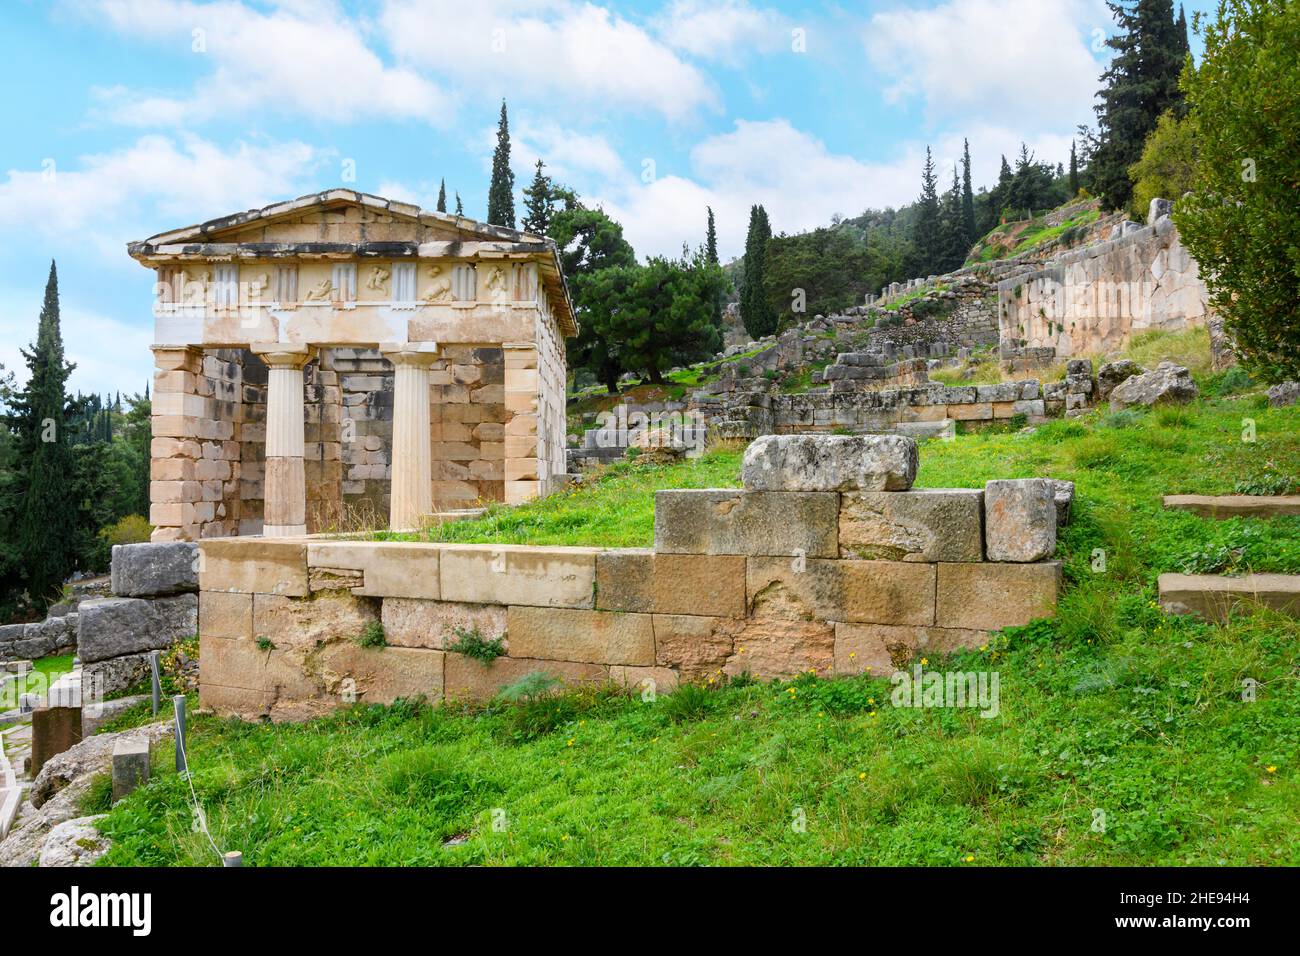 View of the mountain and ruins at the ancient oracle site of Delphi, Greece, with the Athenian Treasury in the foreground. Stock Photo